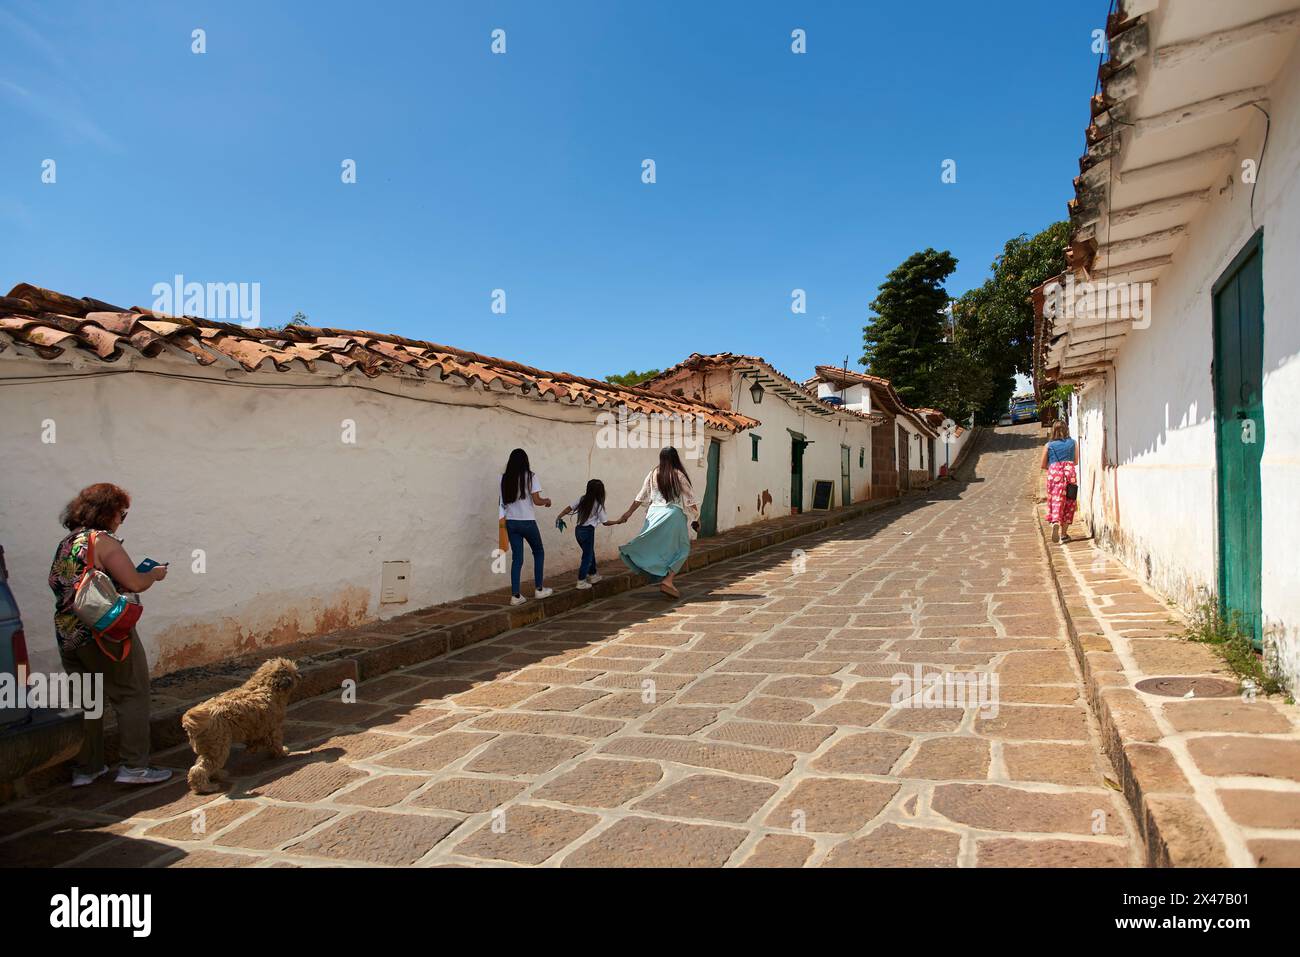 Barichara, Santander, Colombia; November 25, 2022: people walking along a street with colonial architecture in this tourist town, declared a National Stock Photo